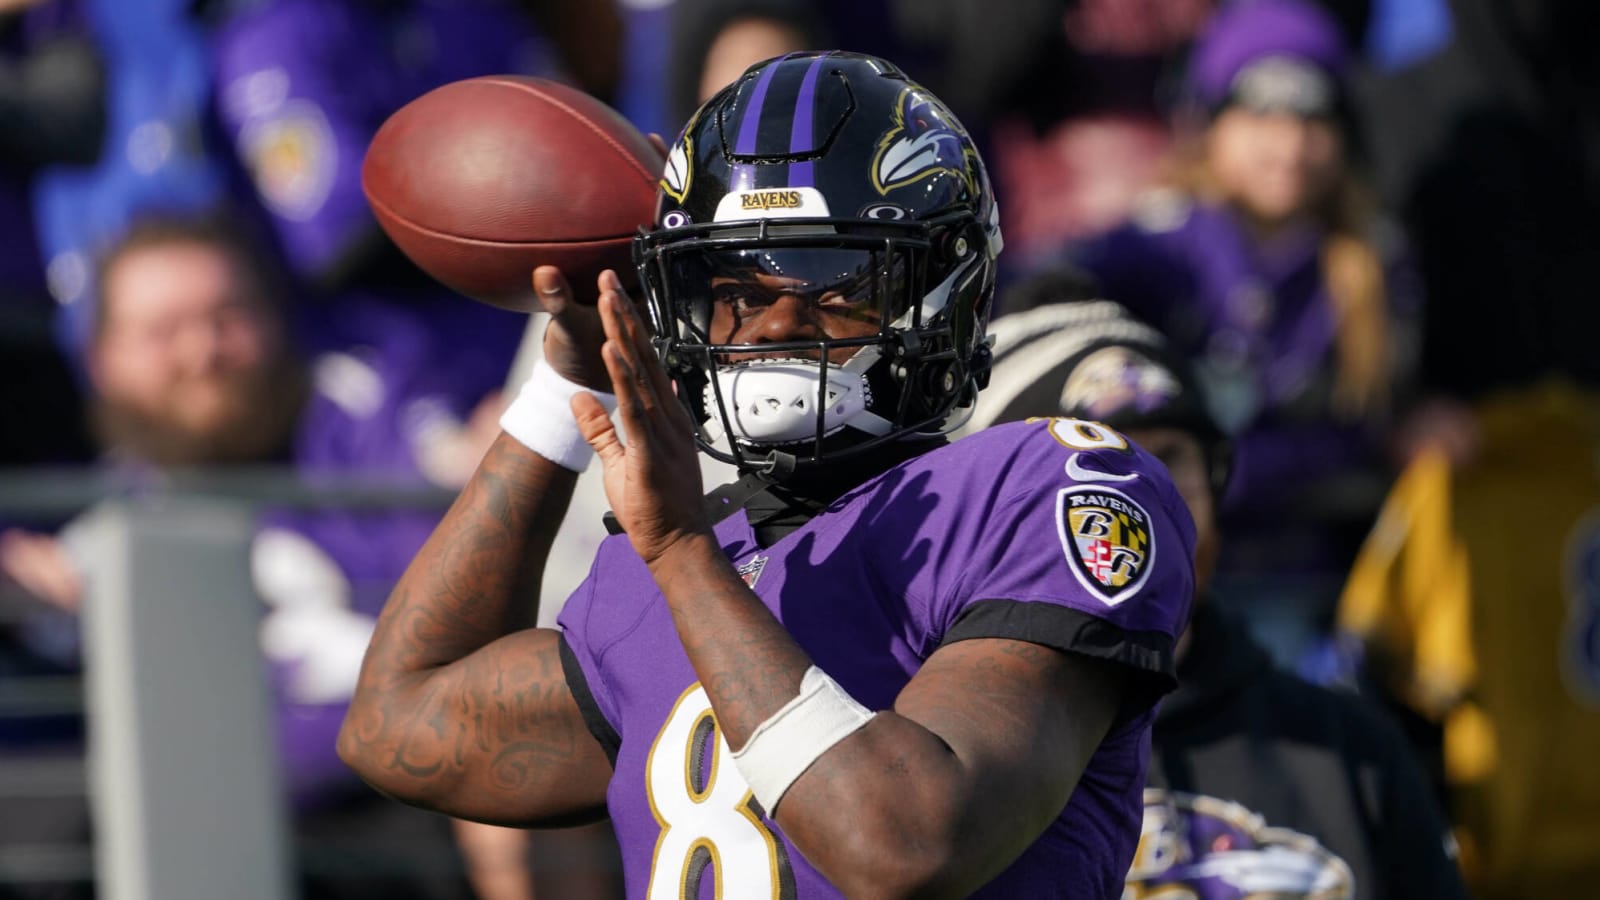 Report: 'Not looking good' for Lamar Jackson to play vs. Bengals